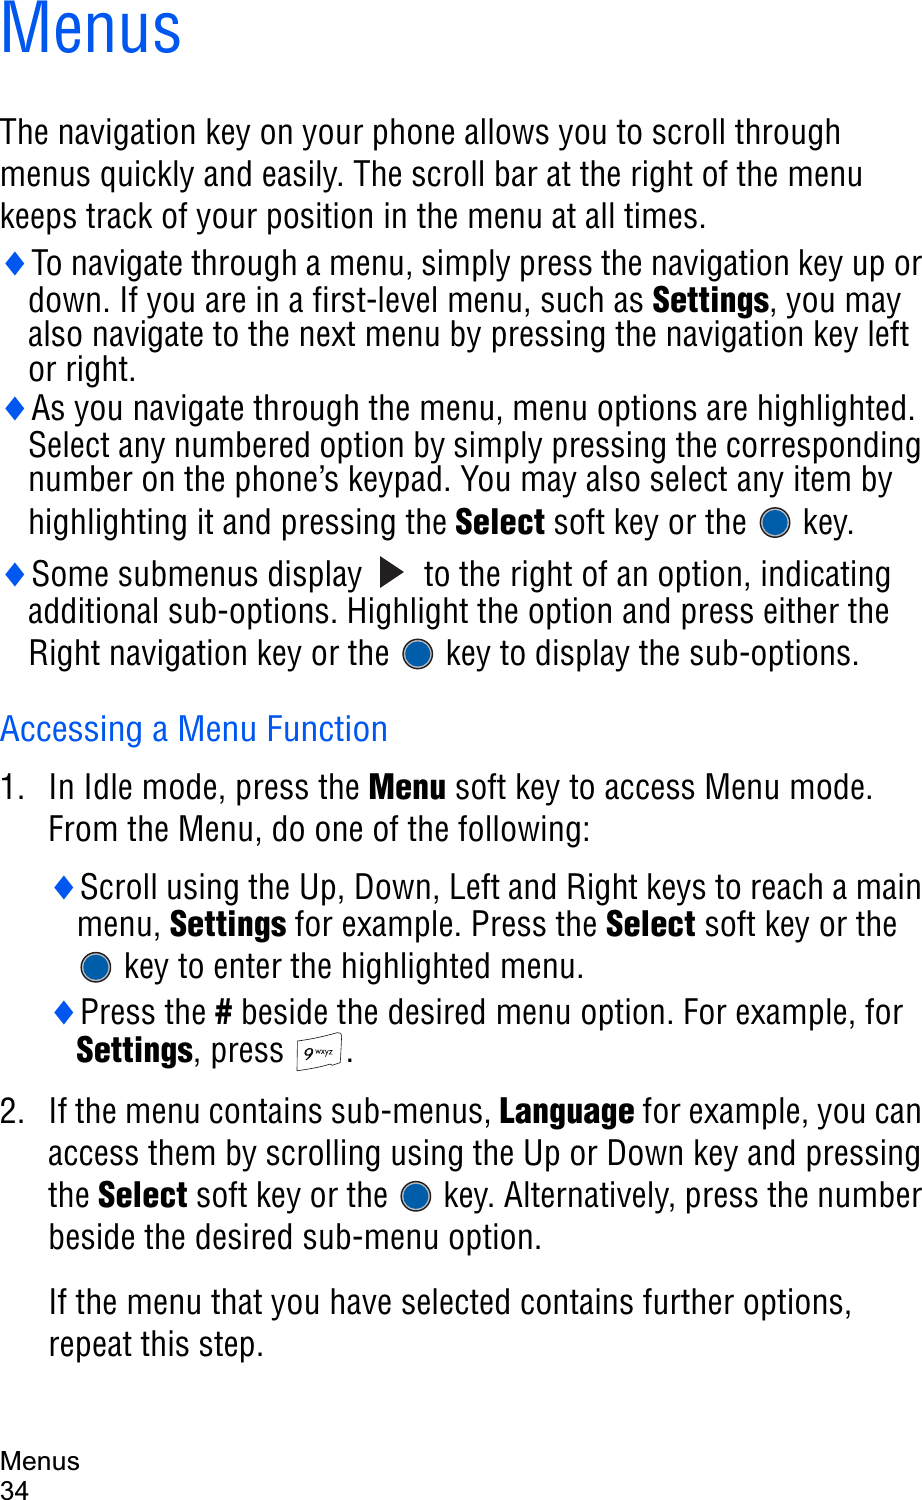 Menus34MenusThe navigation key on your phone allows you to scroll through menus quickly and easily. The scroll bar at the right of the menu keeps track of your position in the menu at all times.iTo navigate through a menu, simply press the navigation key up or down. If you are in a first-level menu, such as Settings, you may also navigate to the next menu by pressing the navigation key left or right.iAs you navigate through the menu, menu options are highlighted. Select any numbered option by simply pressing the corresponding number on the phone’s keypad. You may also select any item by highlighting it and pressing the Select soft key or the  key.iSome submenus display   to the right of an option, indicating additional sub-options. Highlight the option and press either the Right navigation key or the   key to display the sub-options.Accessing a Menu Function1. In Idle mode, press the Menu soft key to access Menu mode. From the Menu, do one of the following:iScroll using the Up, Down, Left and Right keys to reach a main menu, Settings for example. Press the Select soft key or the  key to enter the highlighted menu.iPress the # beside the desired menu option. For example, for Settings, press  .2. If the menu contains sub-menus, Language for example, you can access them by scrolling using the Up or Down key and pressing the Select soft key or the   key. Alternatively, press the number beside the desired sub-menu option. If the menu that you have selected contains further options, repeat this step.